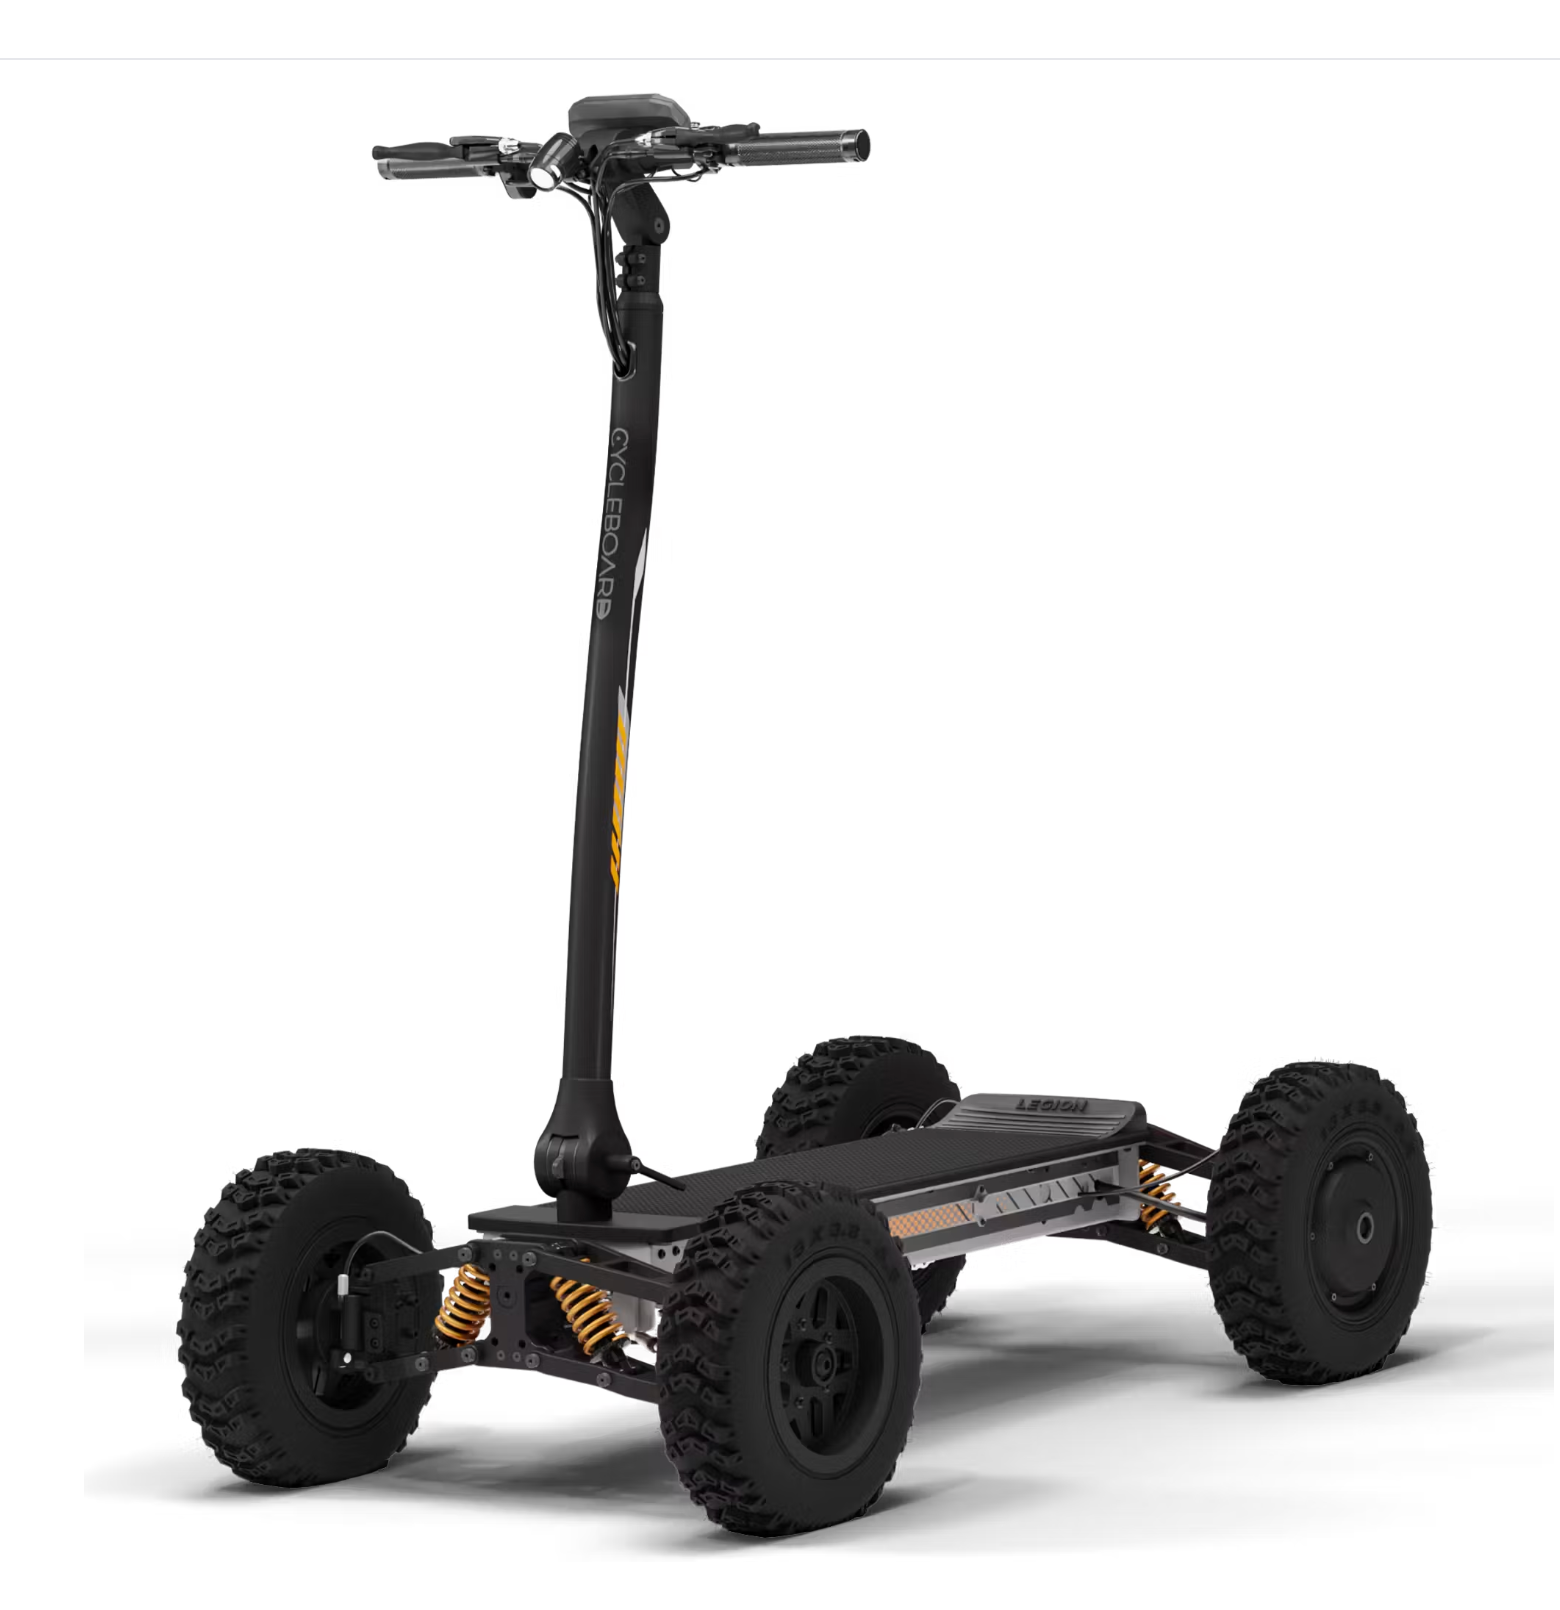 e-boarders-eboarders-cycleboard-xquad-3000-x-quad-4-wheel-rugged-all-terrain-electric-scooter-golf-caddy-escooter-egolf-egolfscooter-folding-eboards